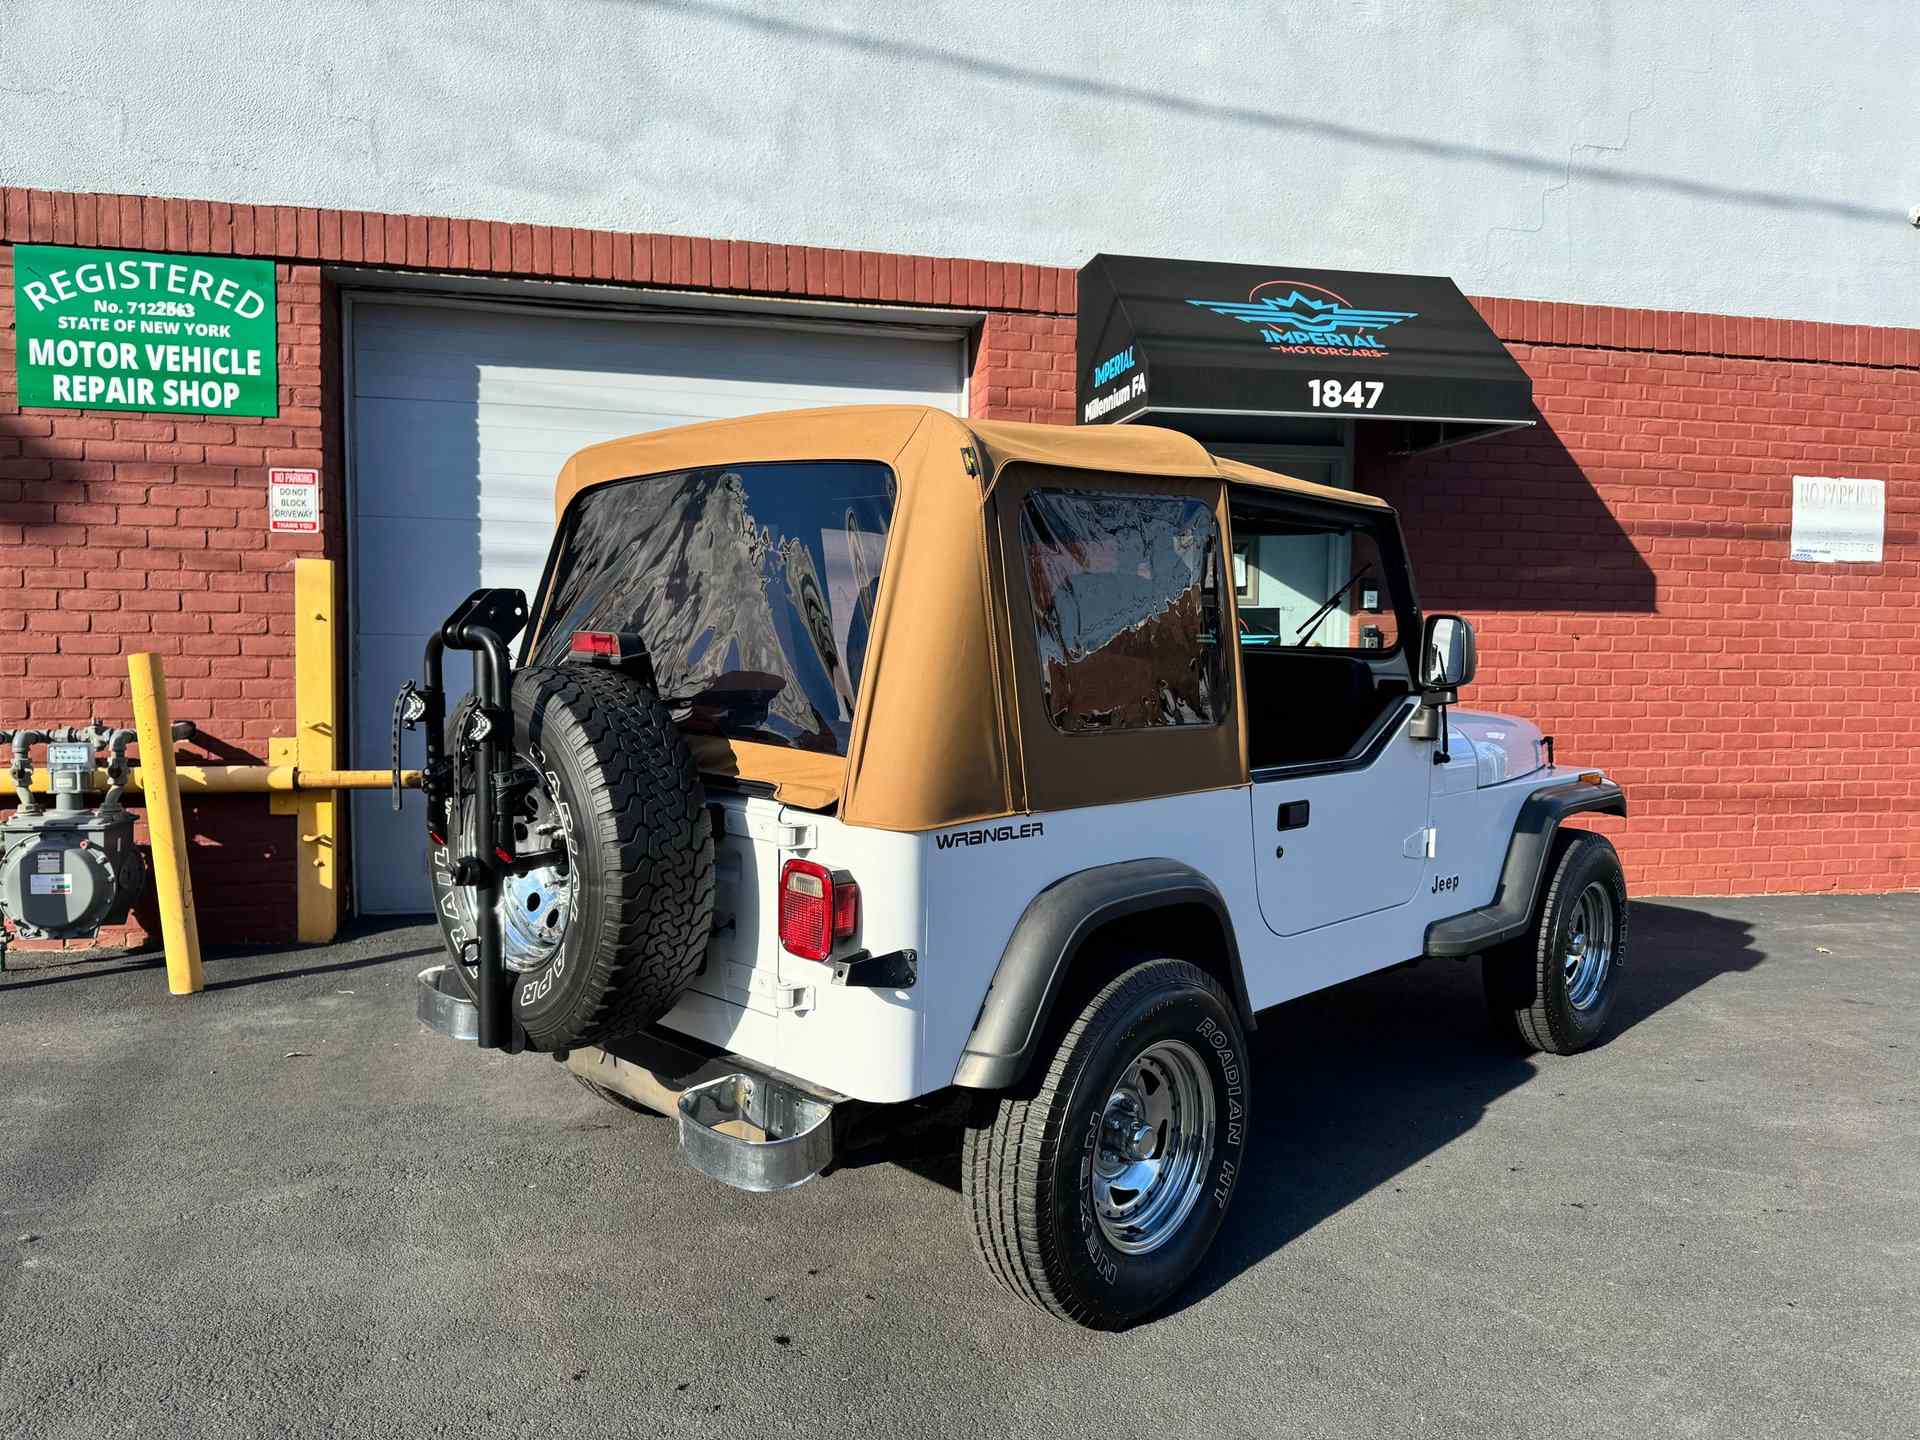 1995-jeep-wrangler-2dr-s-for-sale-02